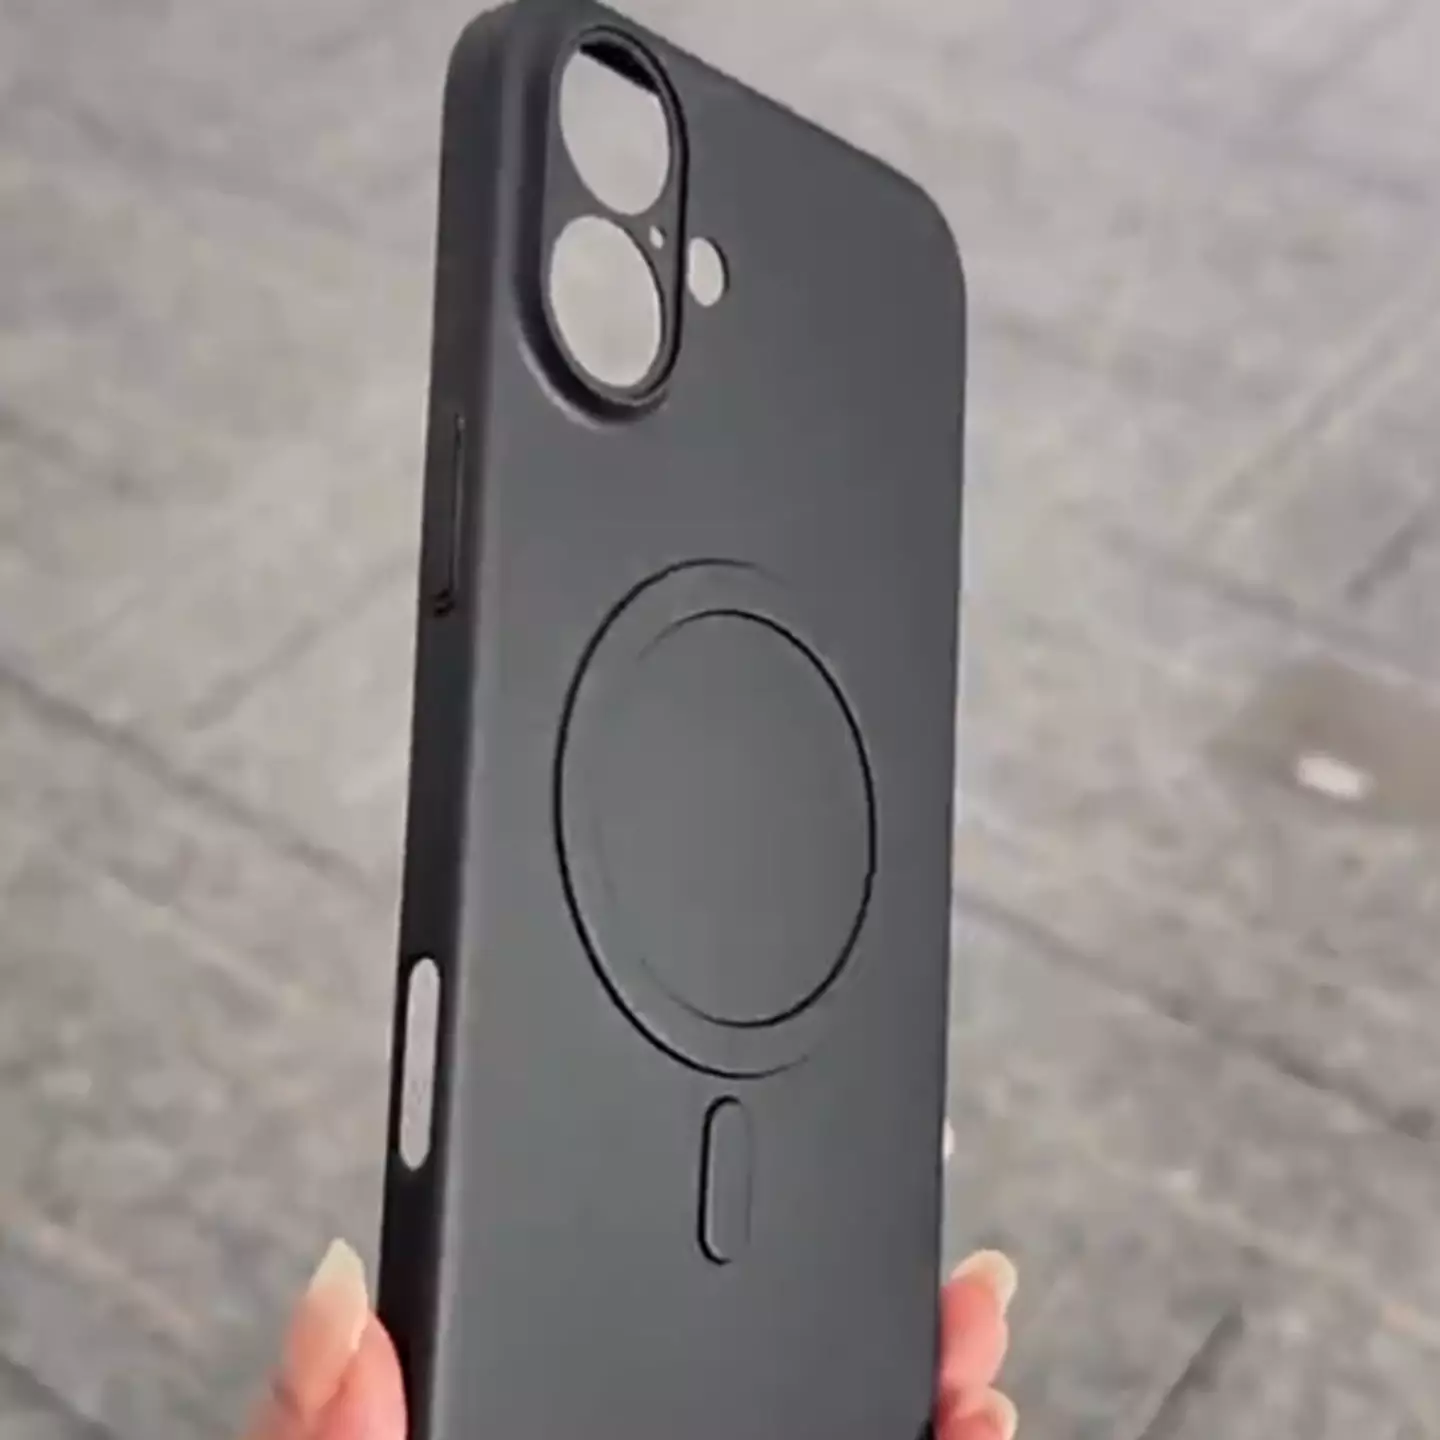 Video leak suggests new Apple iPhone 16 will have game changing new button for selfie fans